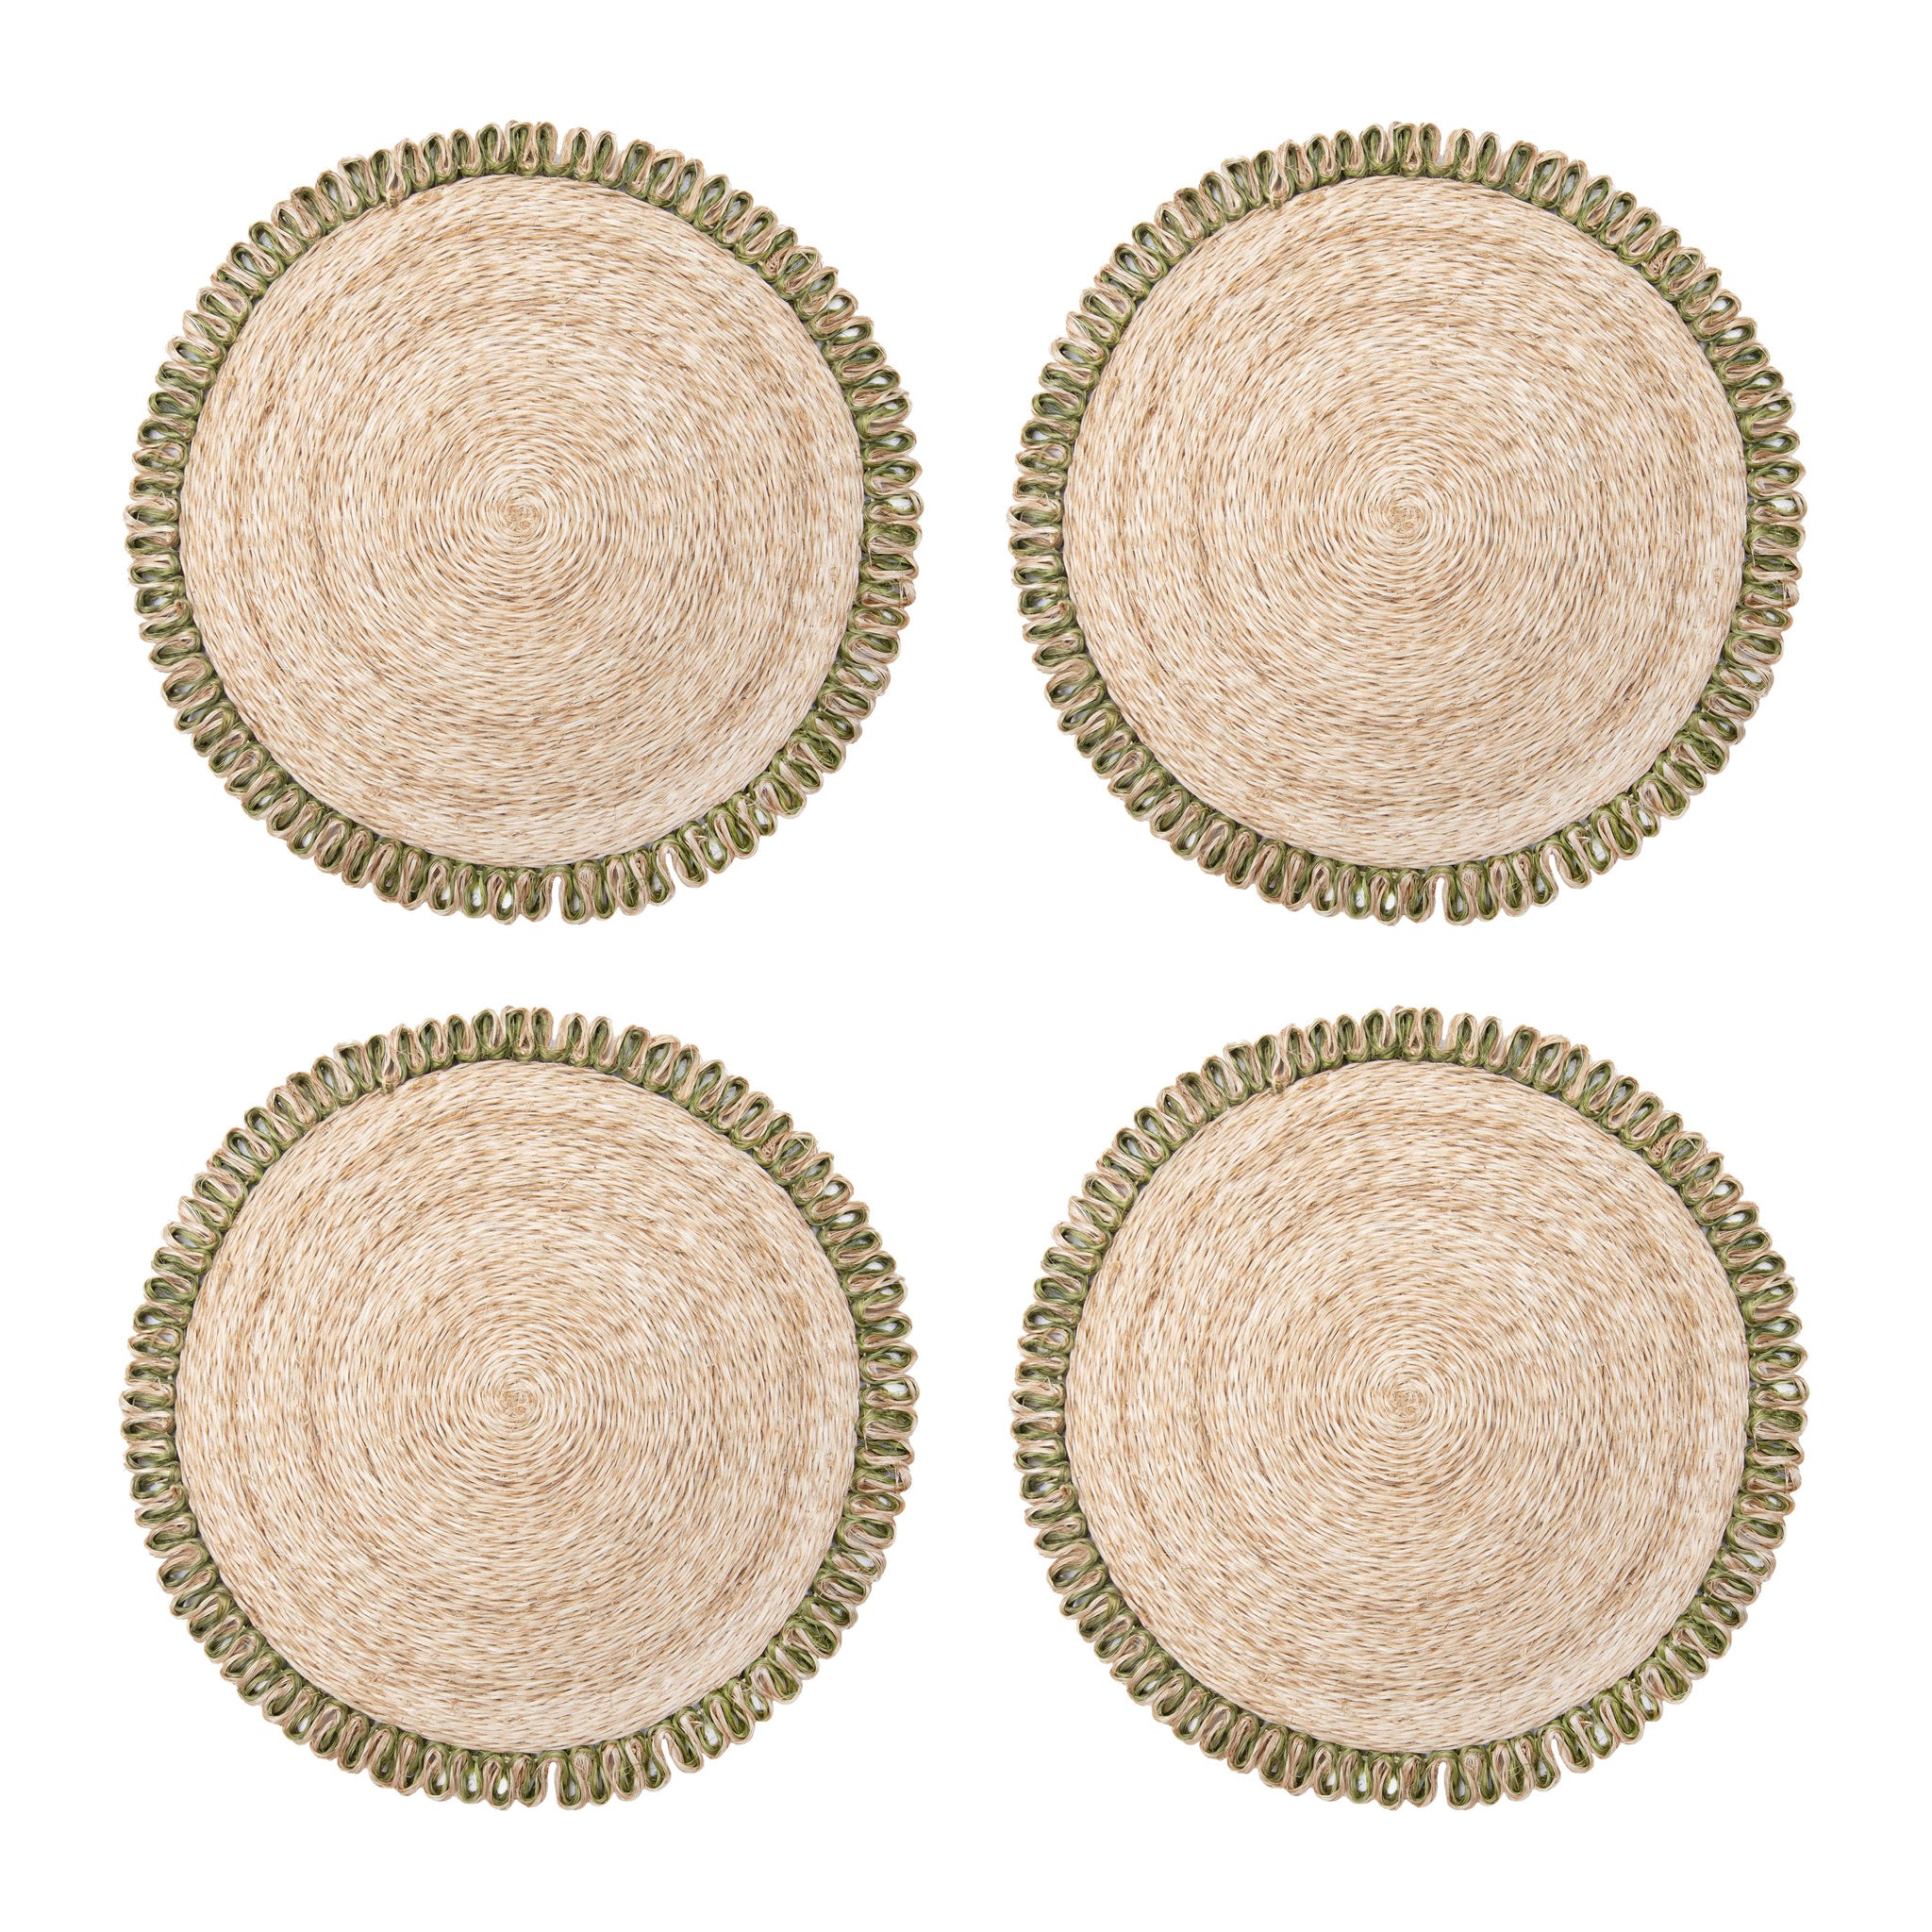 Loopy Abaca 15" Round Placemat - Set of 4